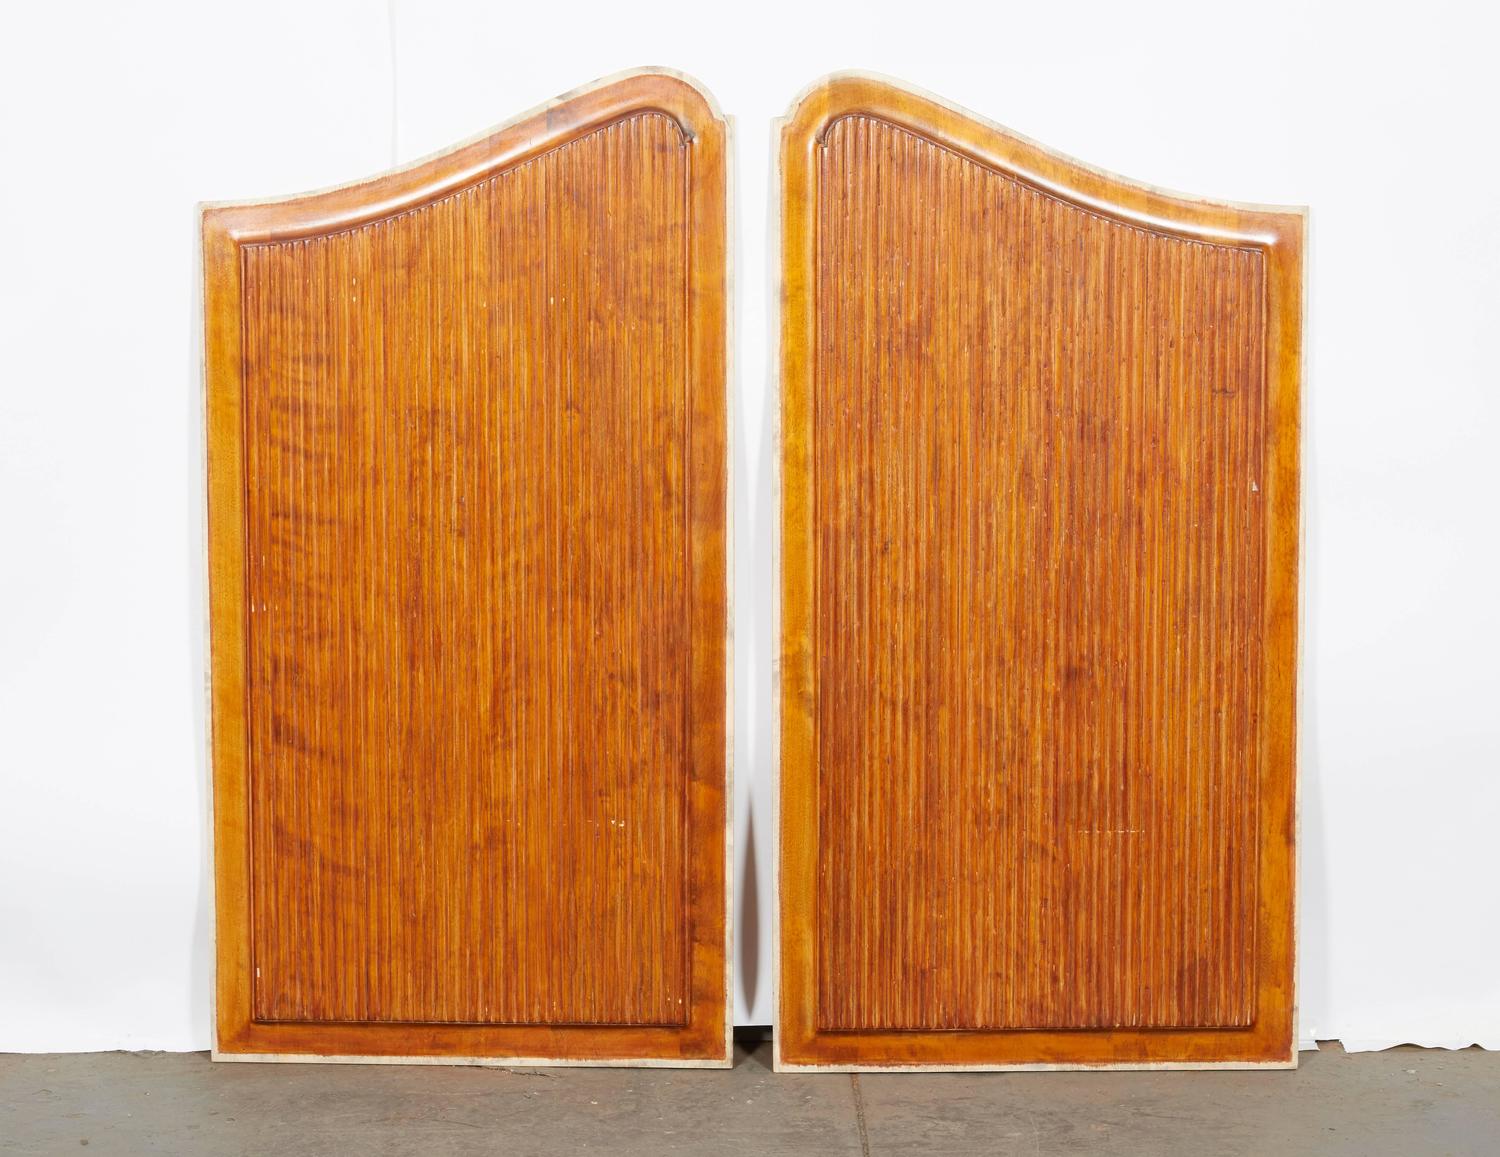  Scaled Swedish Birch Bookcase or Armoire For Sale at 1stdibs